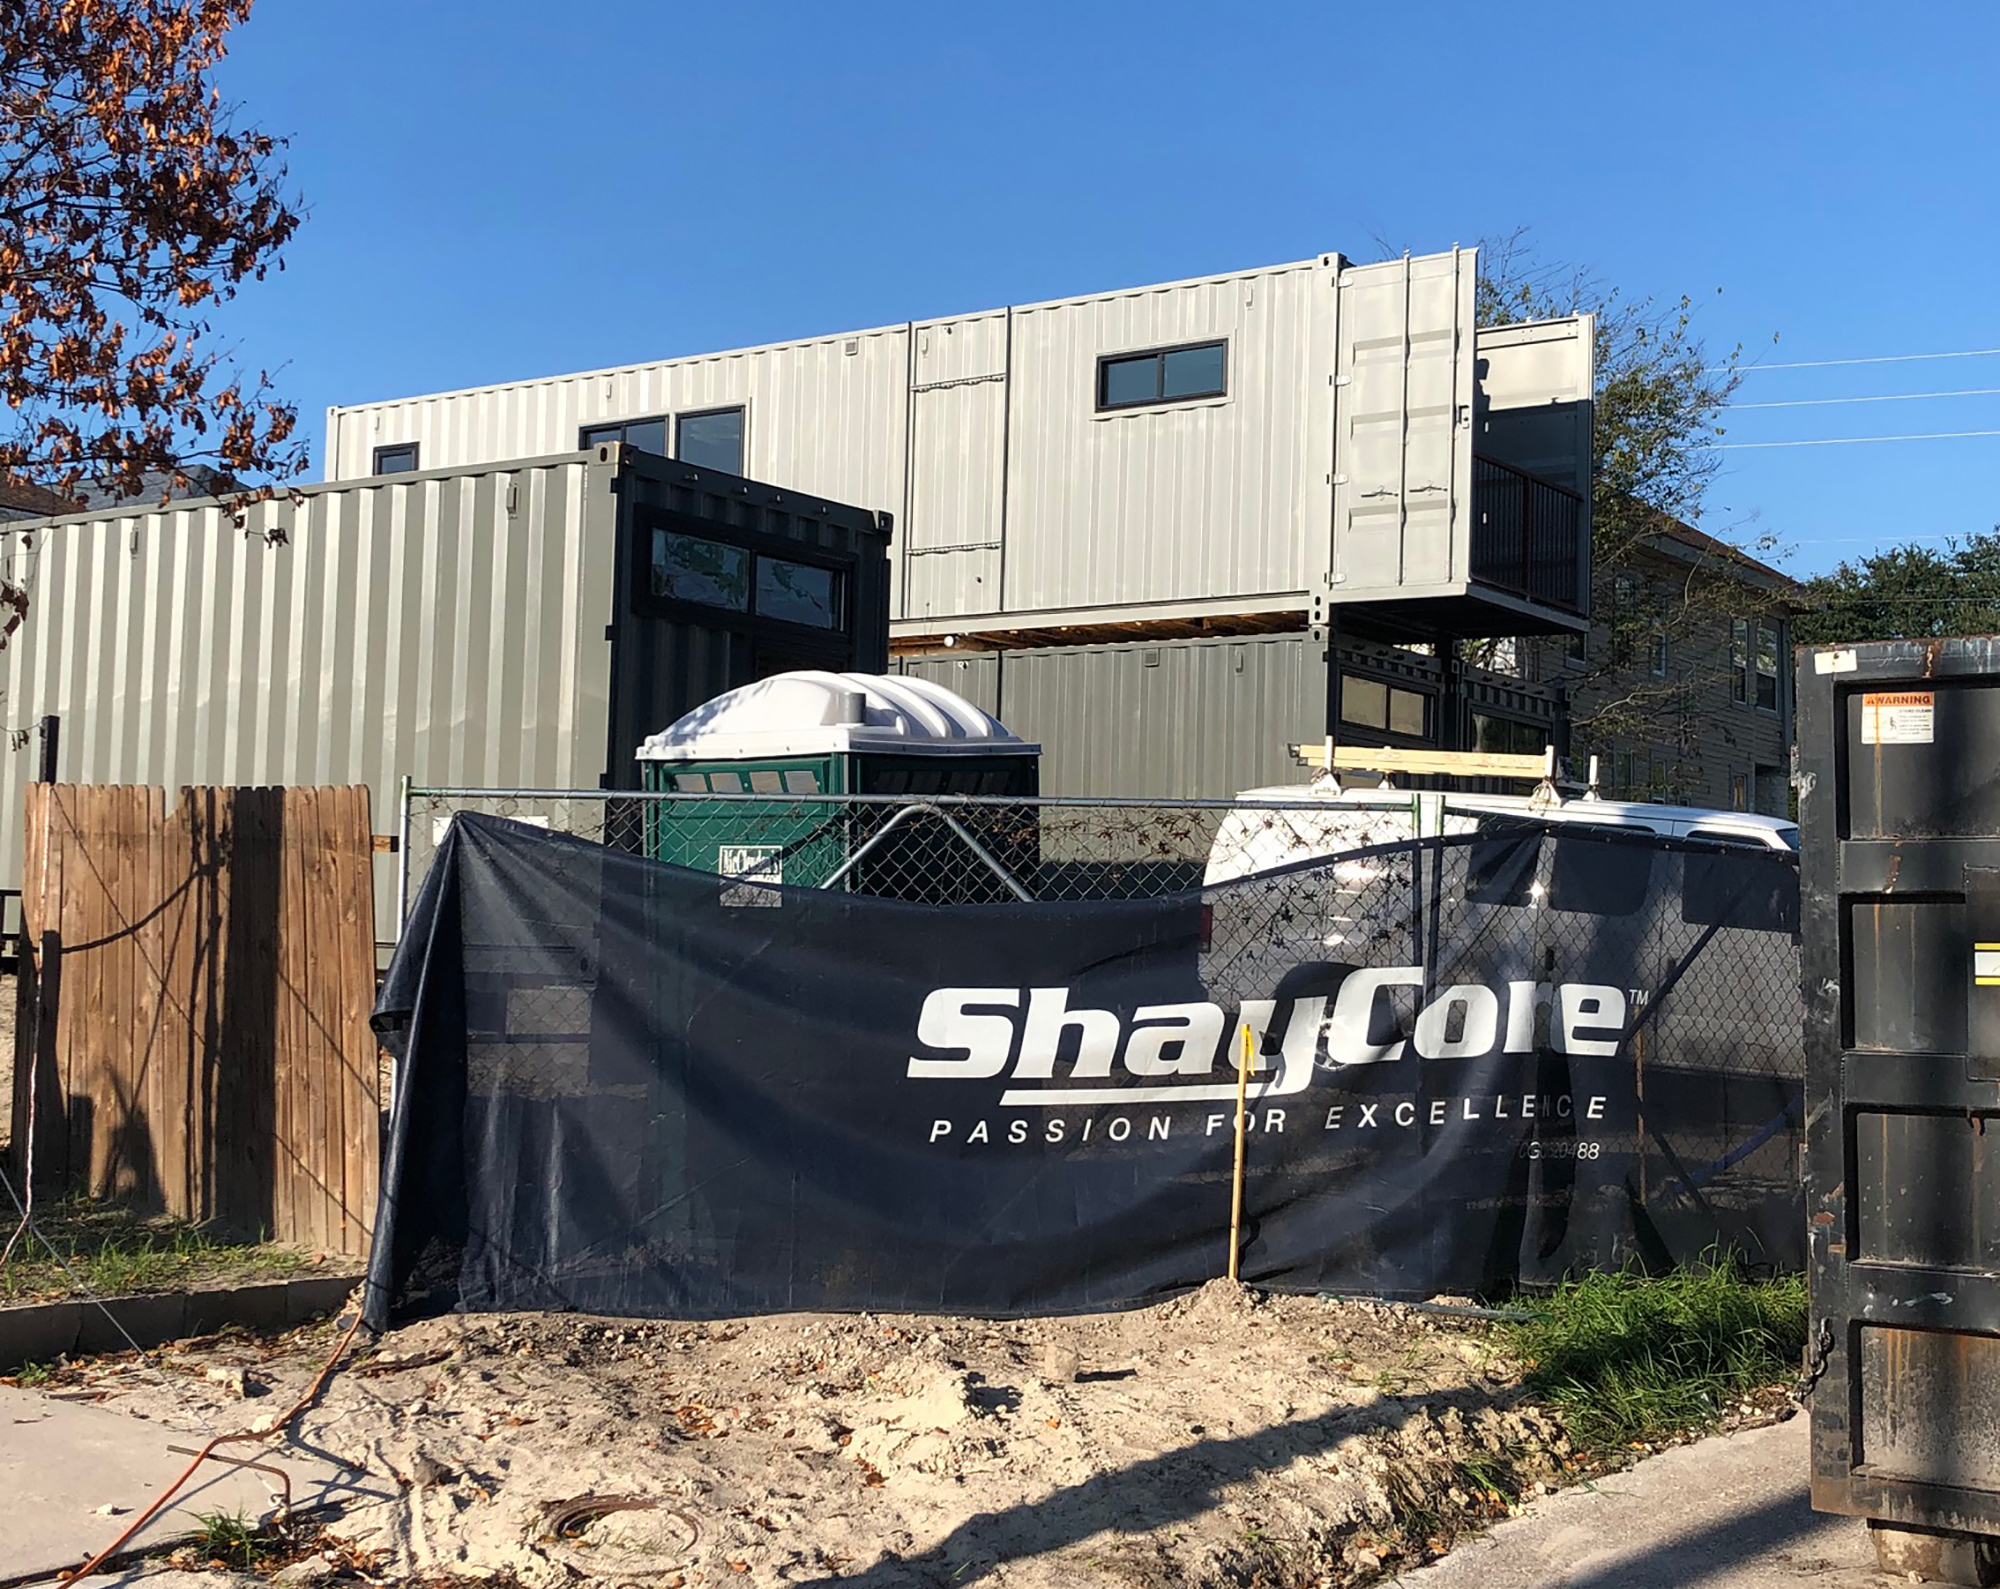 ShayCore L.L.C. is building the shipping container homes.